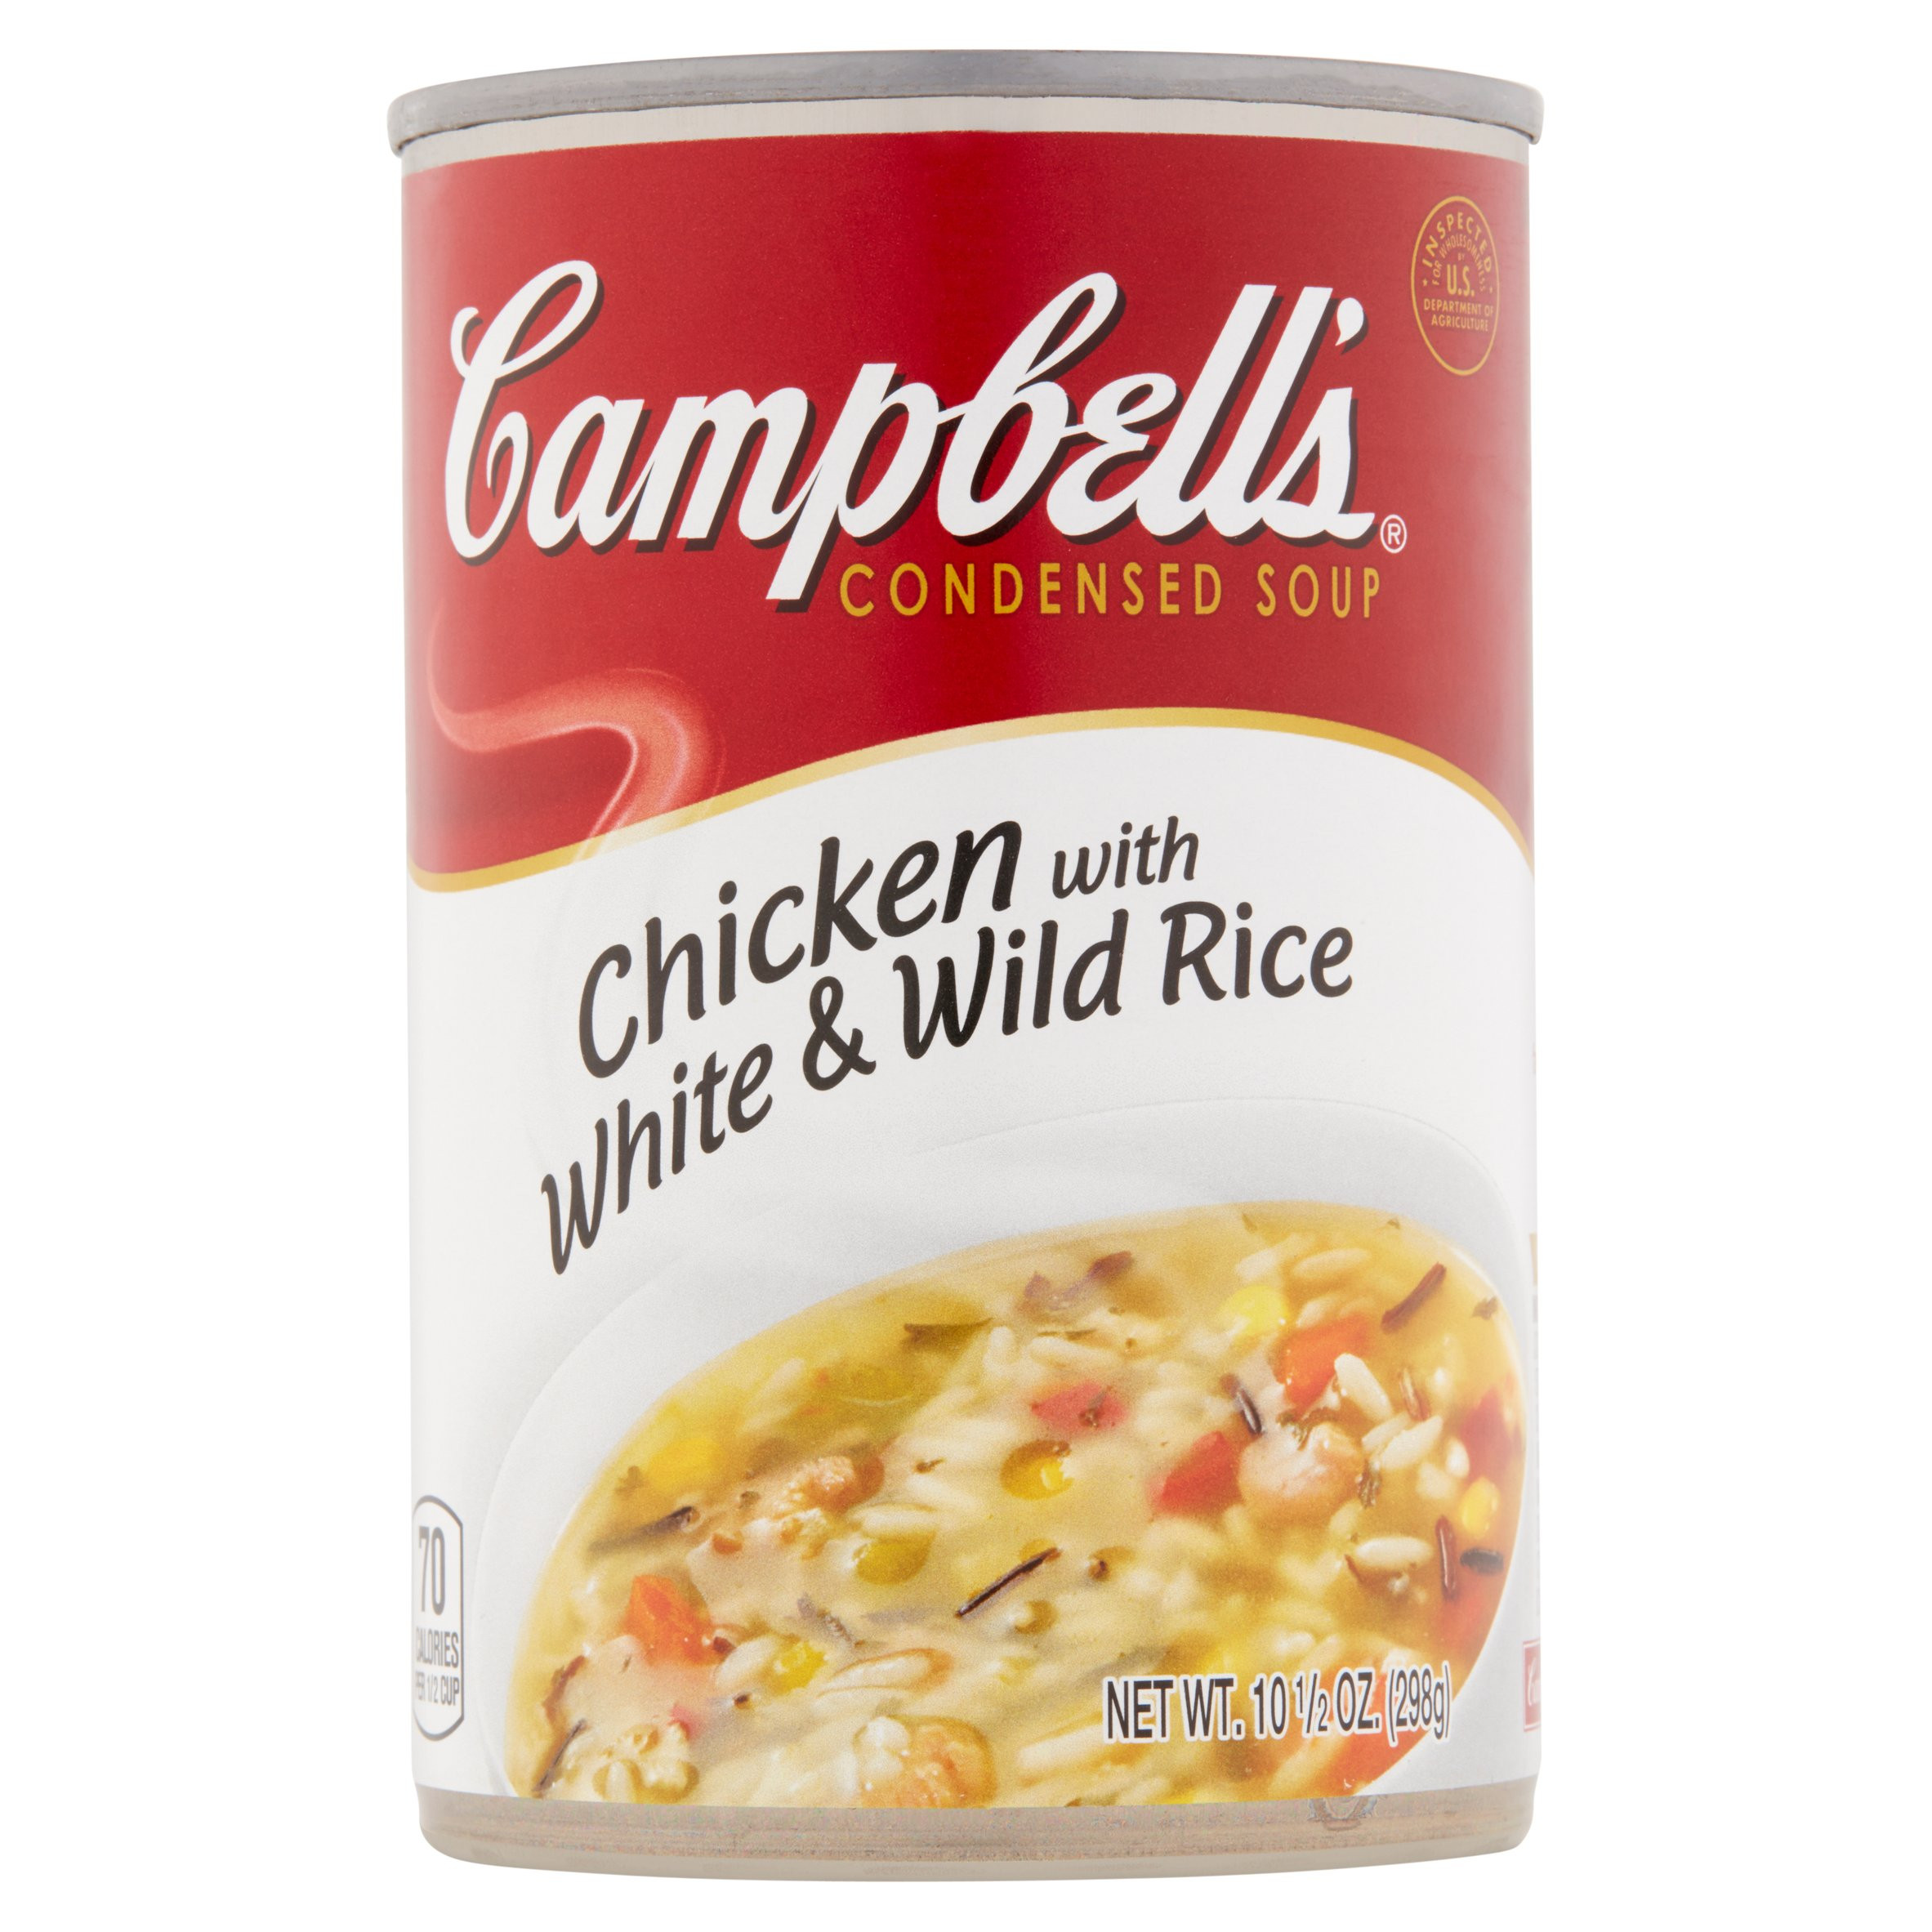 Campbells Soup Chicken And Rice
 Campbell s Chicken with White & Wild Rice Condensed Soup